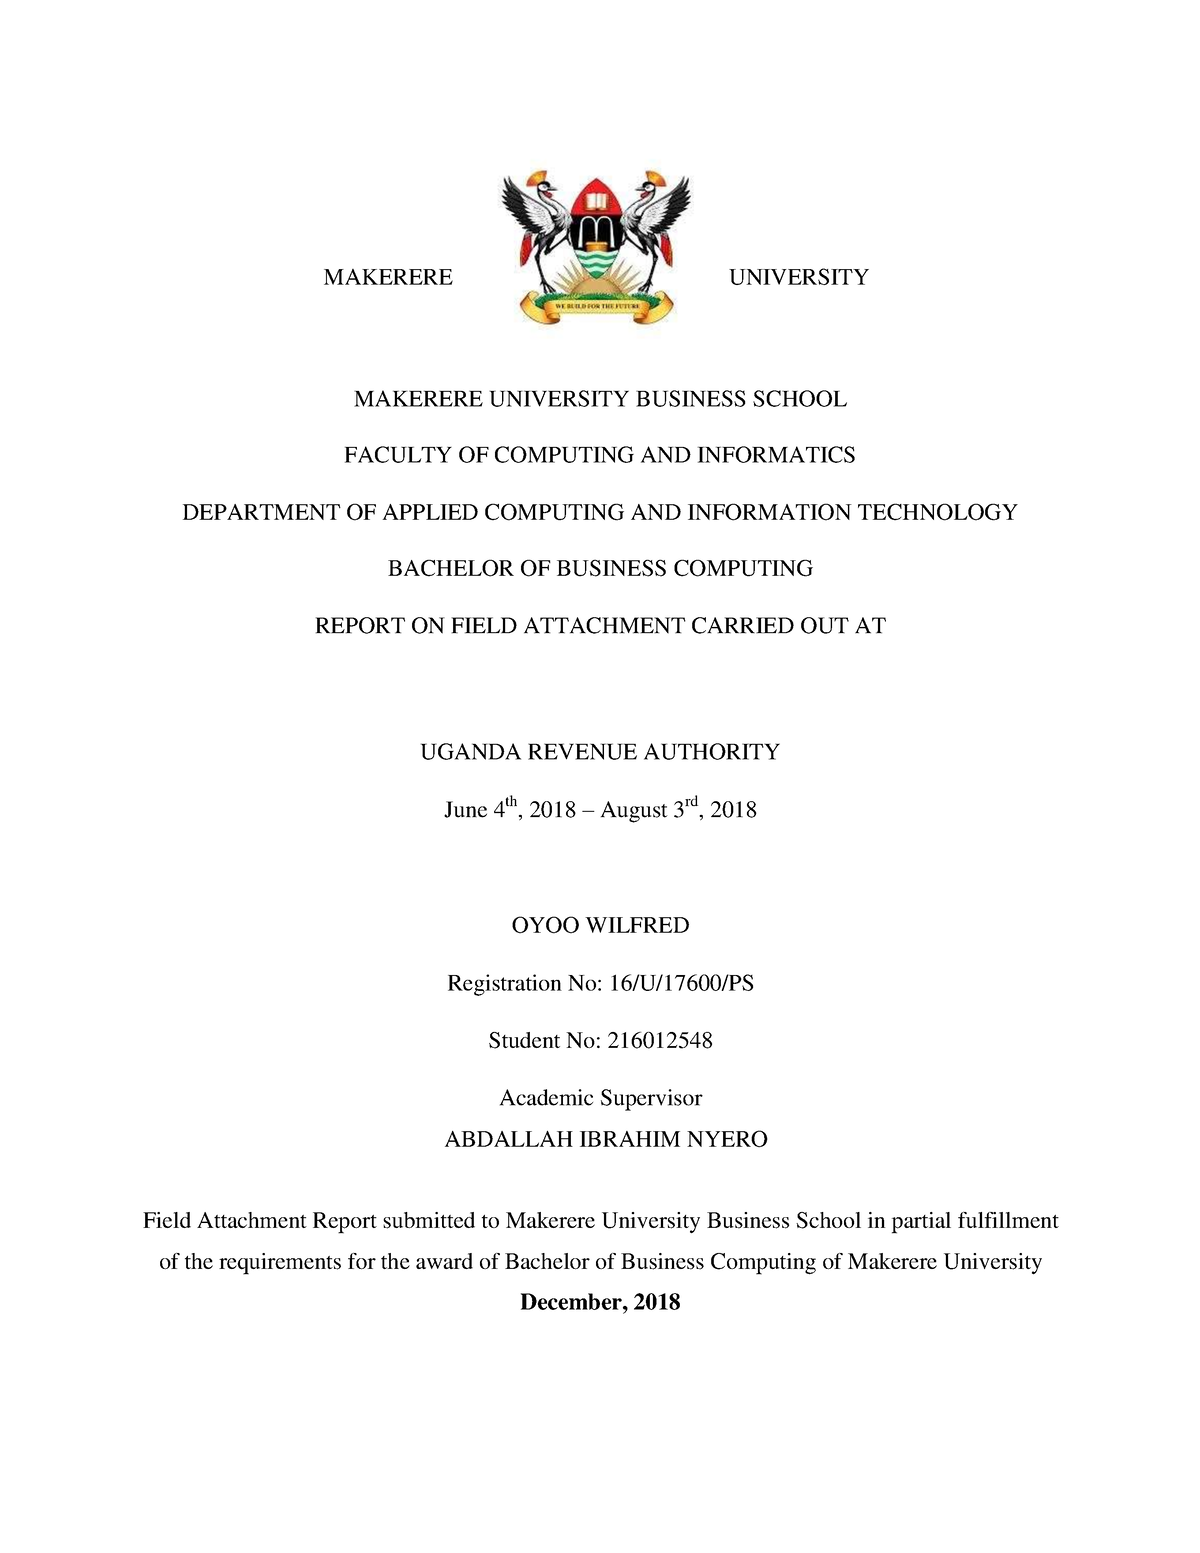 research report submitted to makerere university